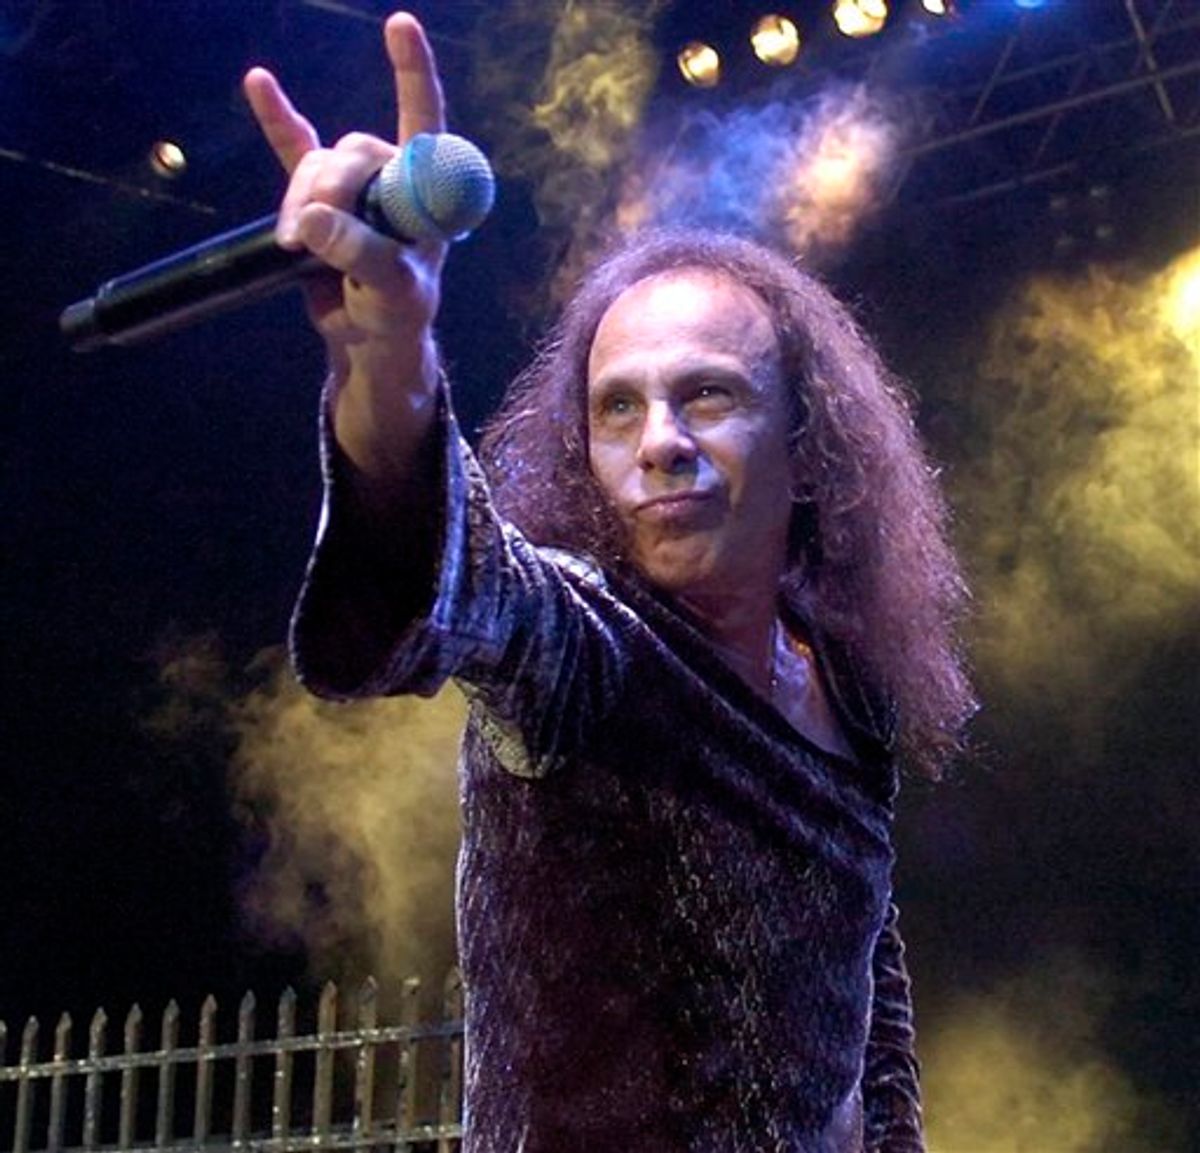 FILE - In this July 7, 2007 file photo, Ronnie James Dio performs with British heavy metal group "Heaven and Hell" during the 41th Montreux Jazz Festival in Montreux, Switzerland. Dio, the metal god who replaced Ozzy Osbourne in Black Sabbath and later piloted the bands Heaven &amp; Hell and Dio, died Sunday, May 16, 2010, according to his wife and manager. He was 67. (AP Photo/Keystone, Sandro Campardo, File) (AP)